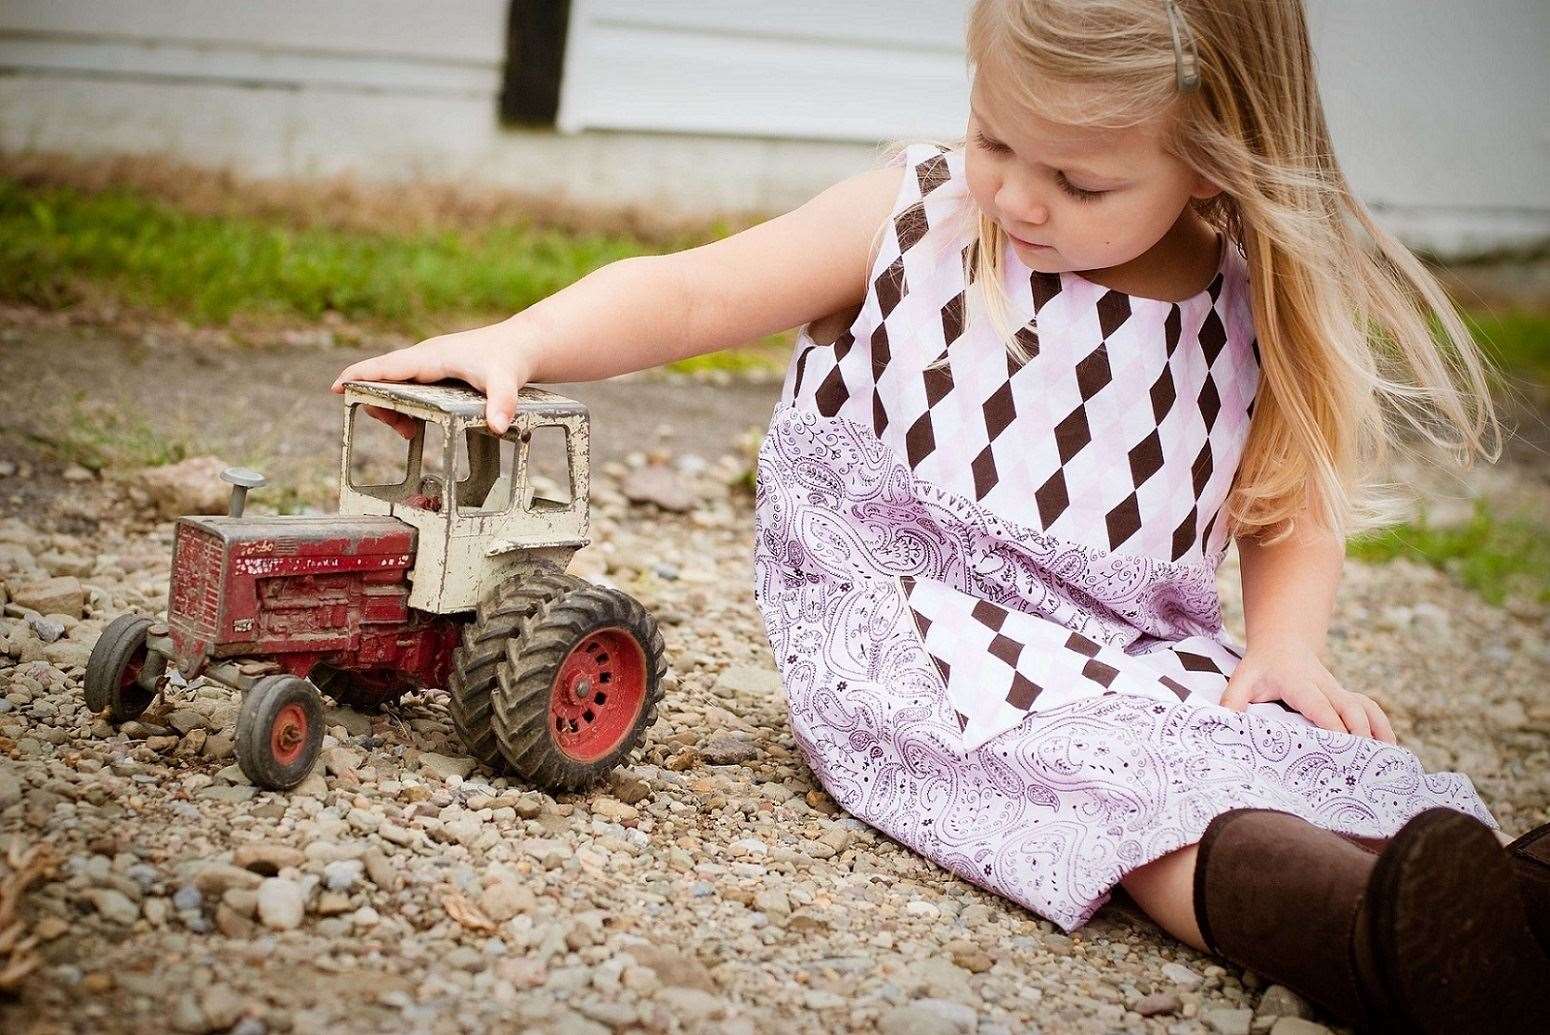 Farm safety is an important for youngsters